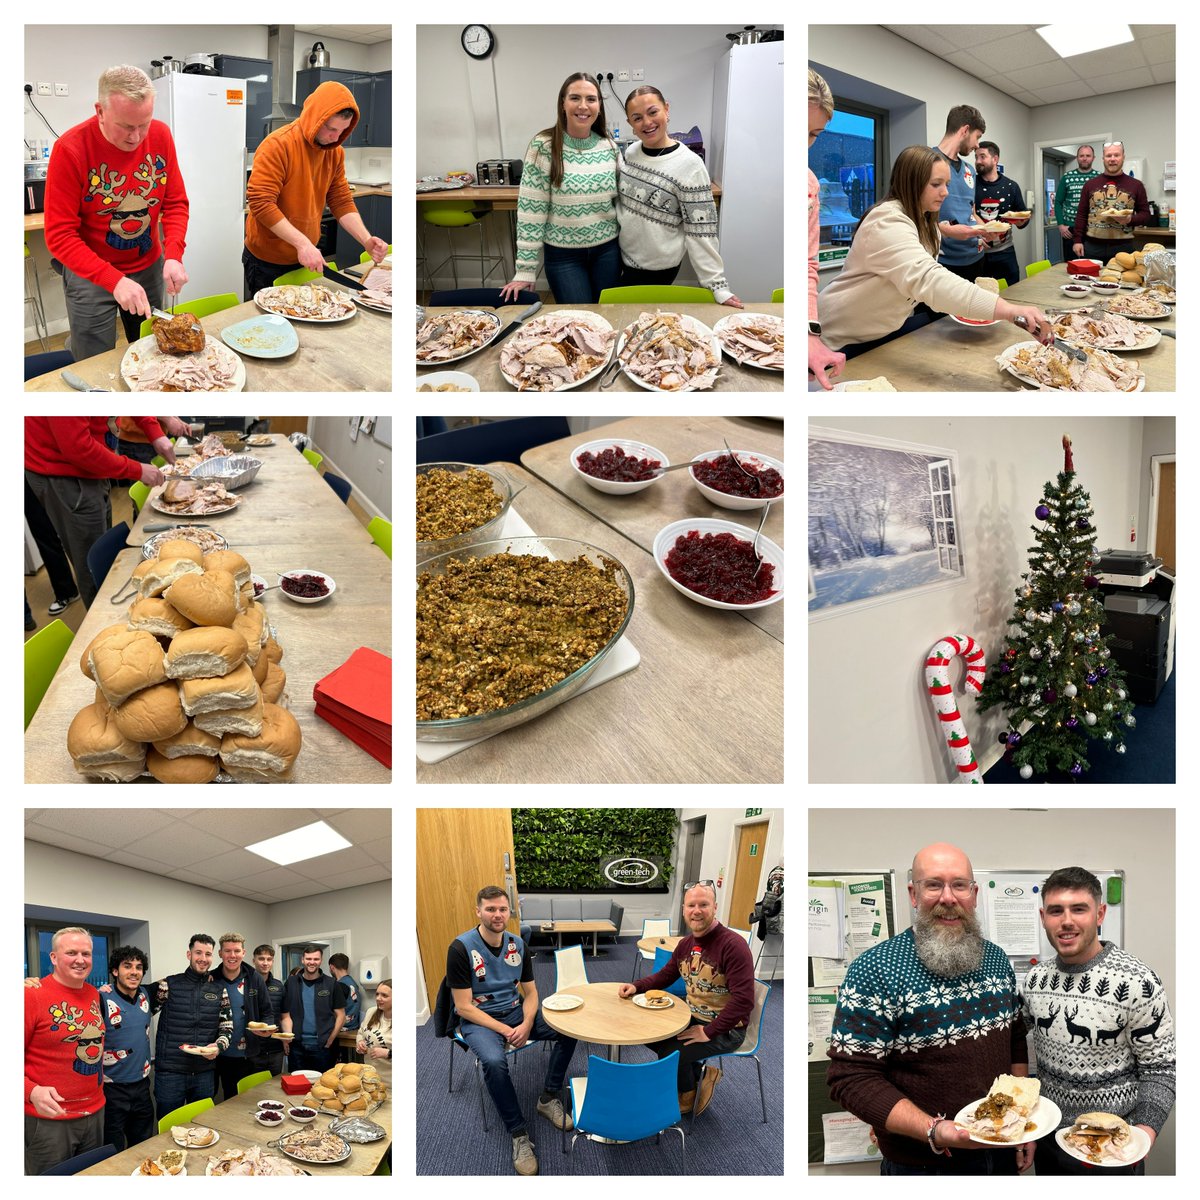 It's #ChristmasJumperDay which means one thing... #TeamGT dusted off our best festive glad rags and tucked into a festive lunch! The team enjoyed Christmas dinner sandwiches to get everyone feeling jolly. All money raised is going to our charity of the year, @PerennialGRBS!